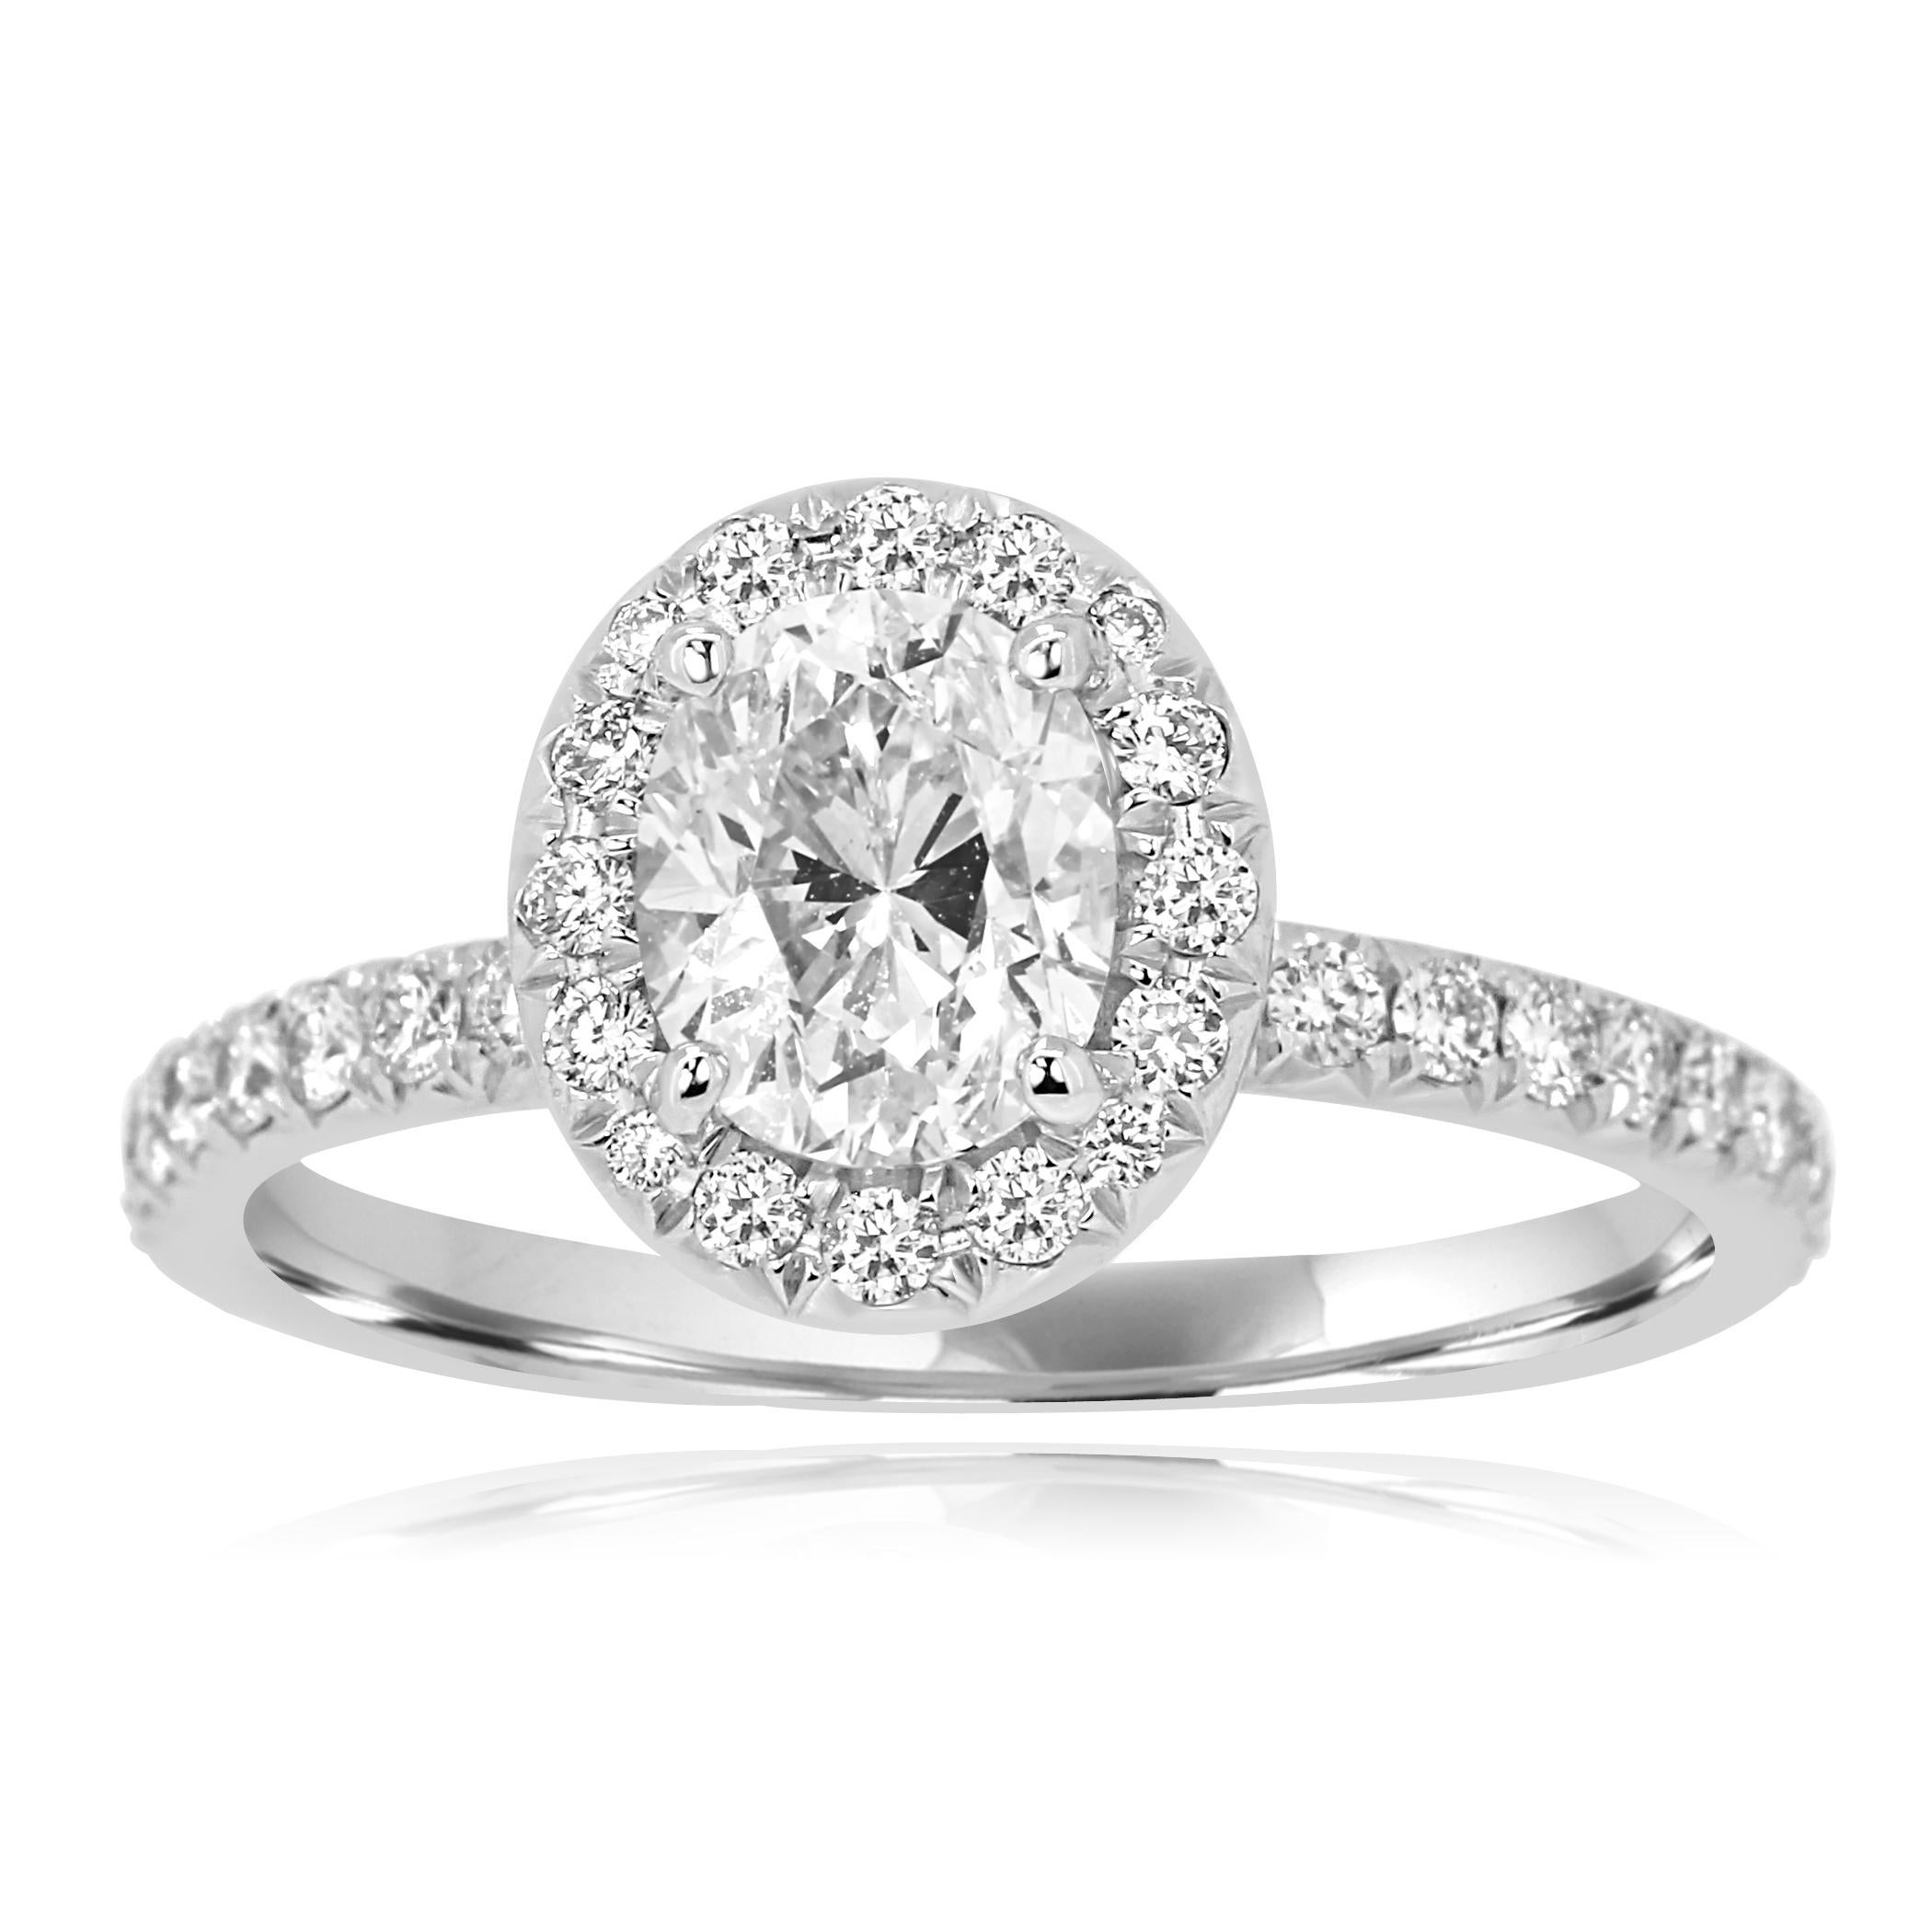 Lovely GIA Certified 1.01 Carat I Color SI2 Clarity Oval Diamond Encircled in a Single Hale of White Round Diamond 0.49 Carat in 18k White Gold and Platinum Engagement Ring.
Wedding Band available separately.

Style available in different price